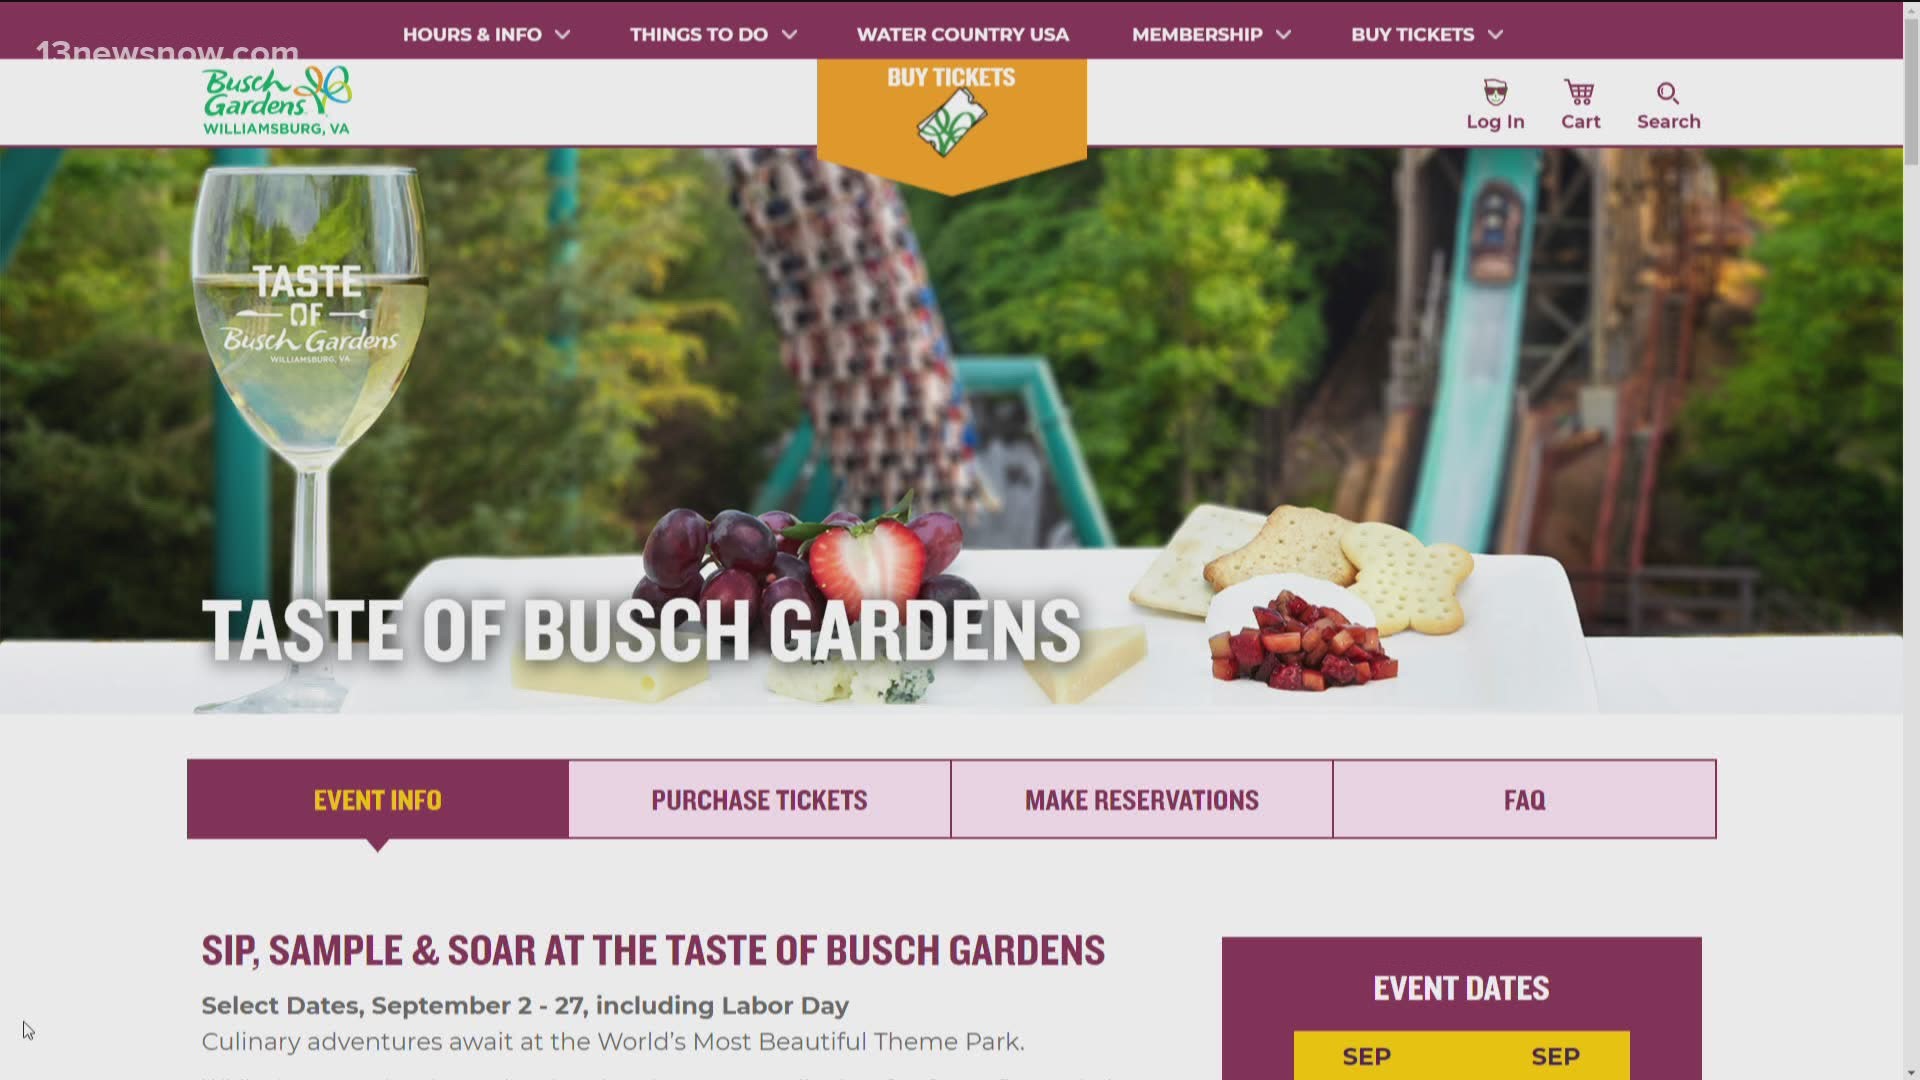 The 'Taste of Busch Gardens' runs on select days from September 2nd through the 27th. Reservations are required.